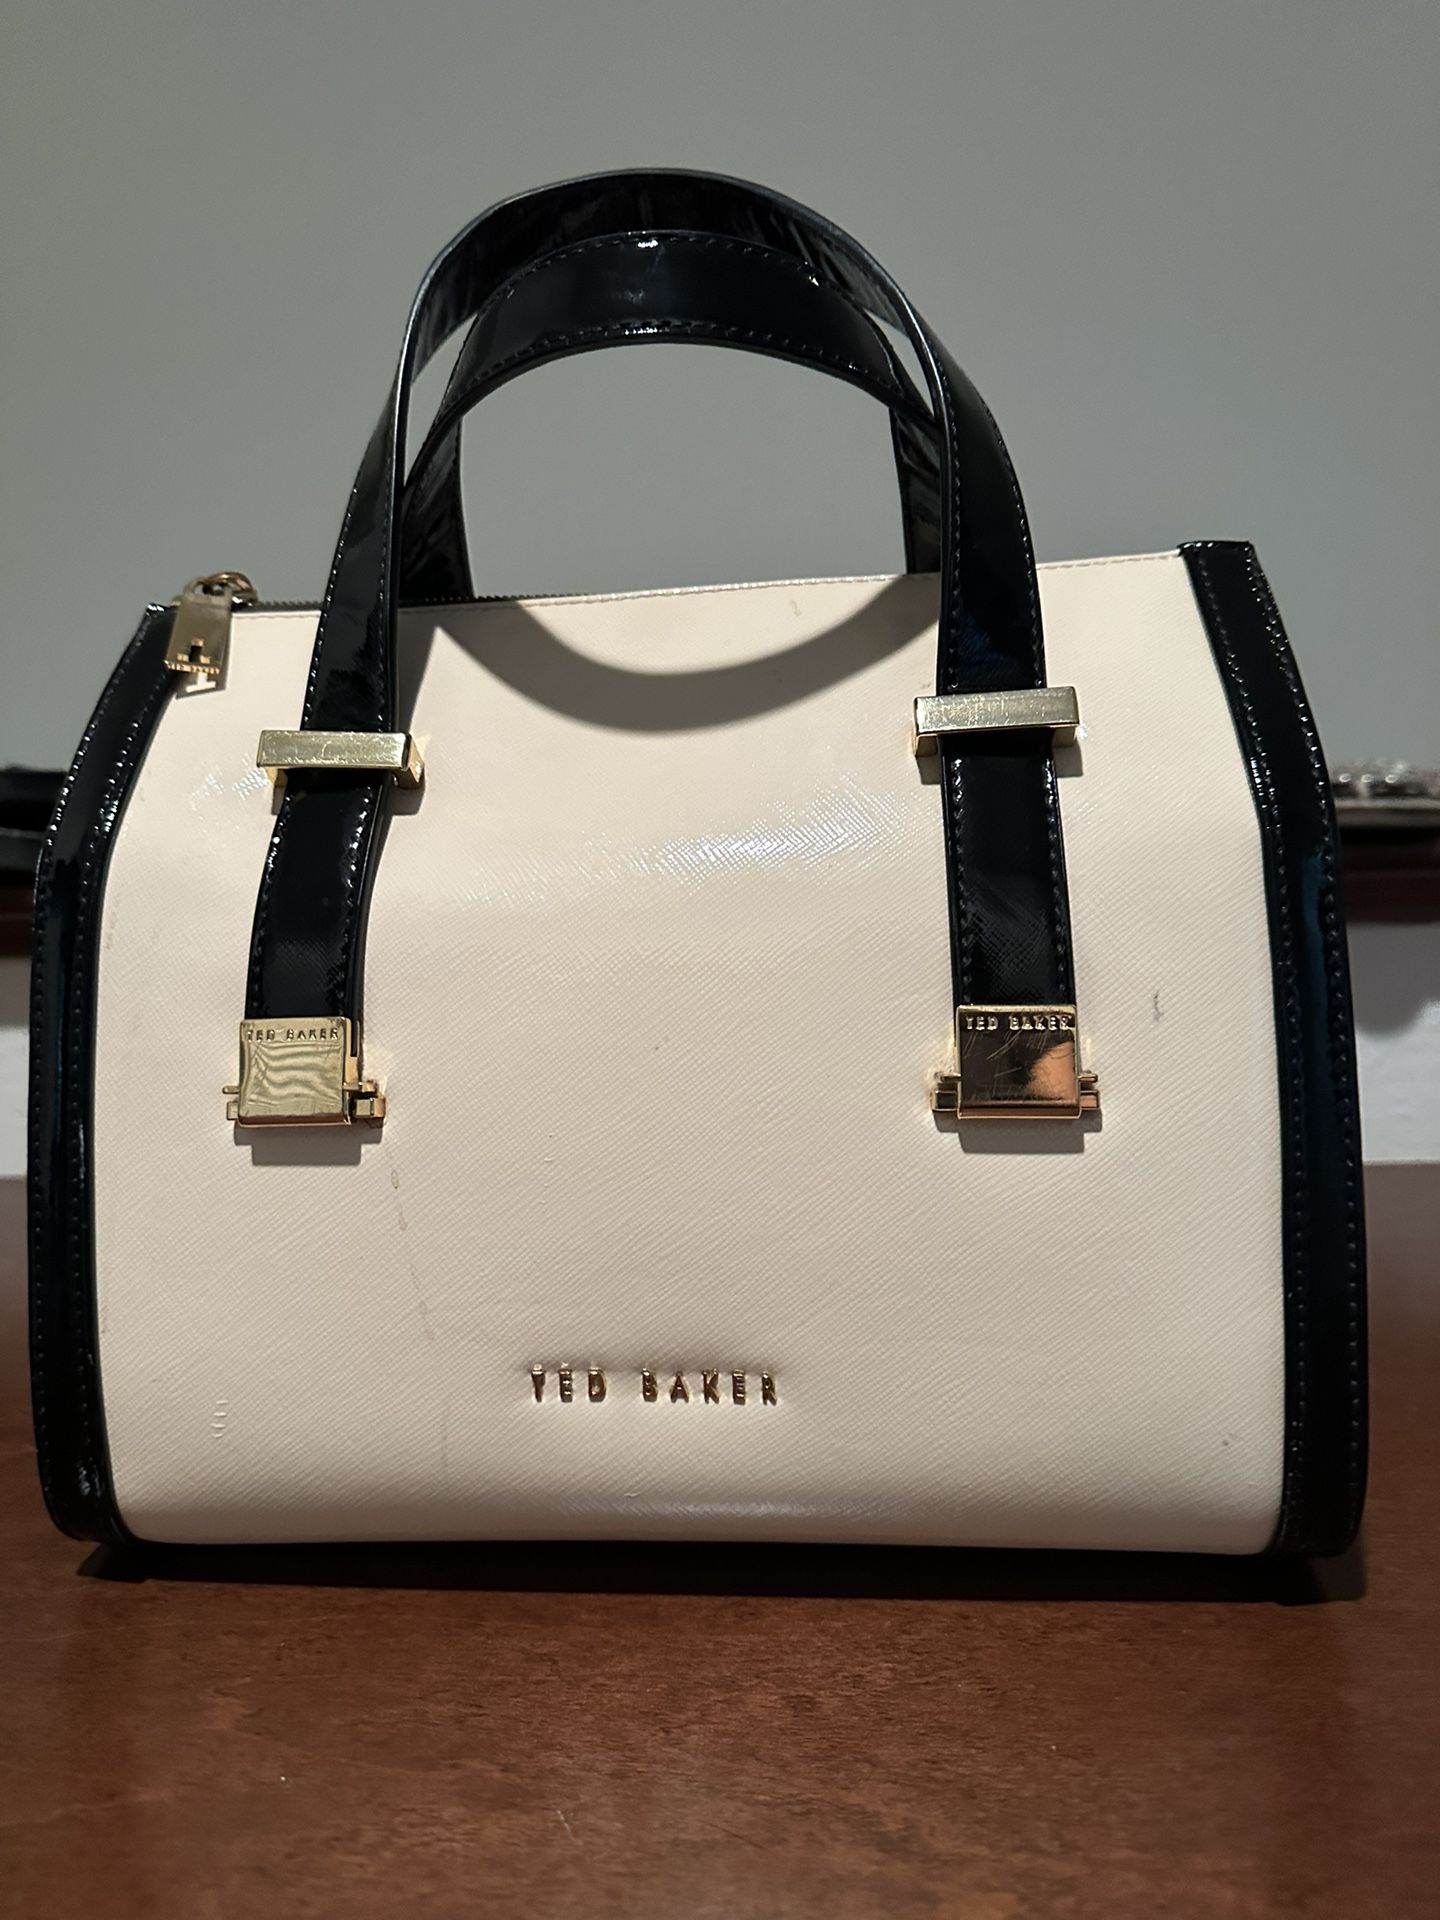 Ted baker Multicolored Satchel